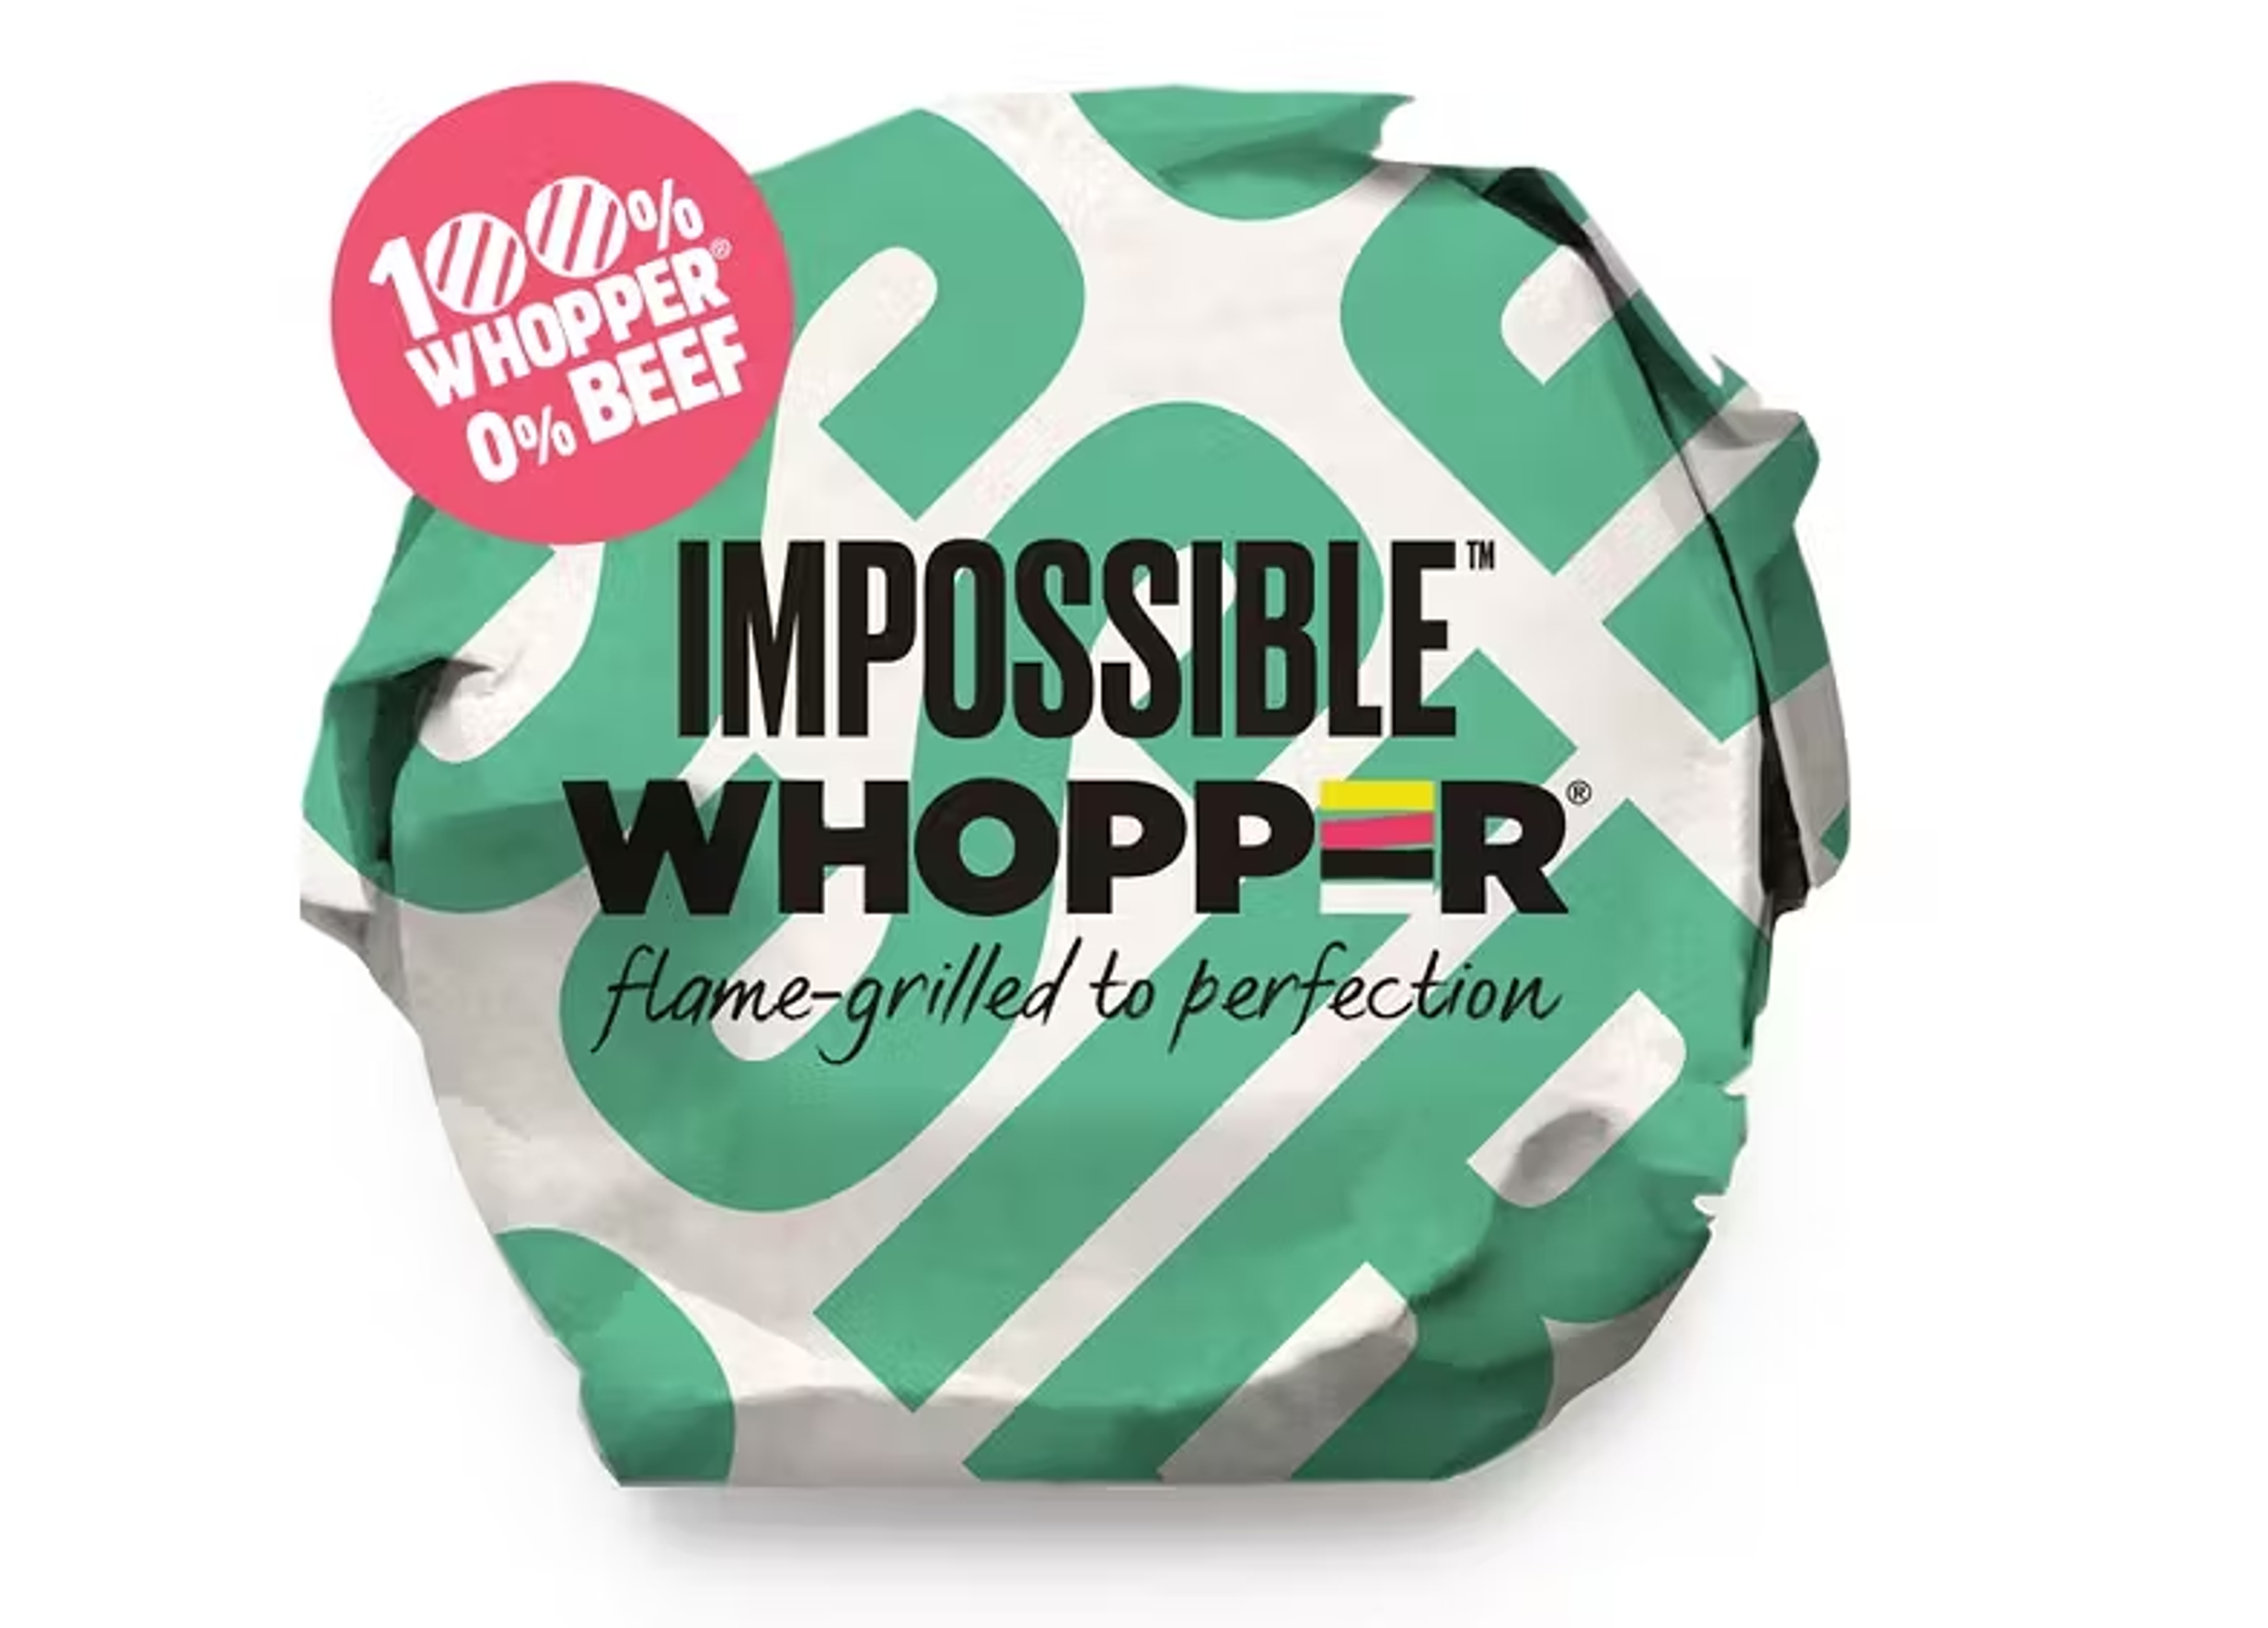 Impossible whopper